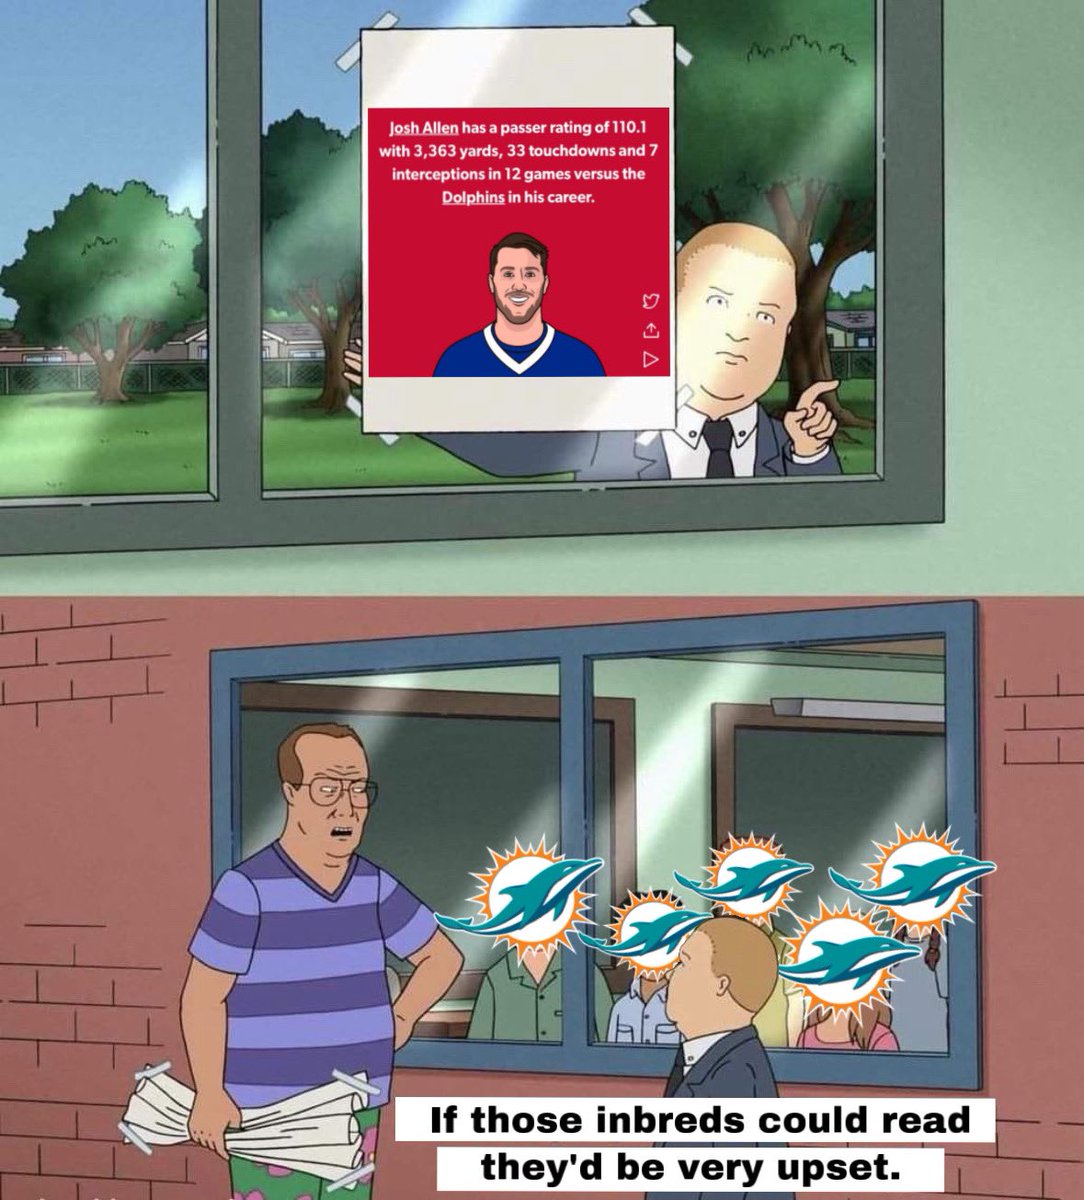 Good thing the education system in Florida is dog shit #FinsUp #BillsMafia